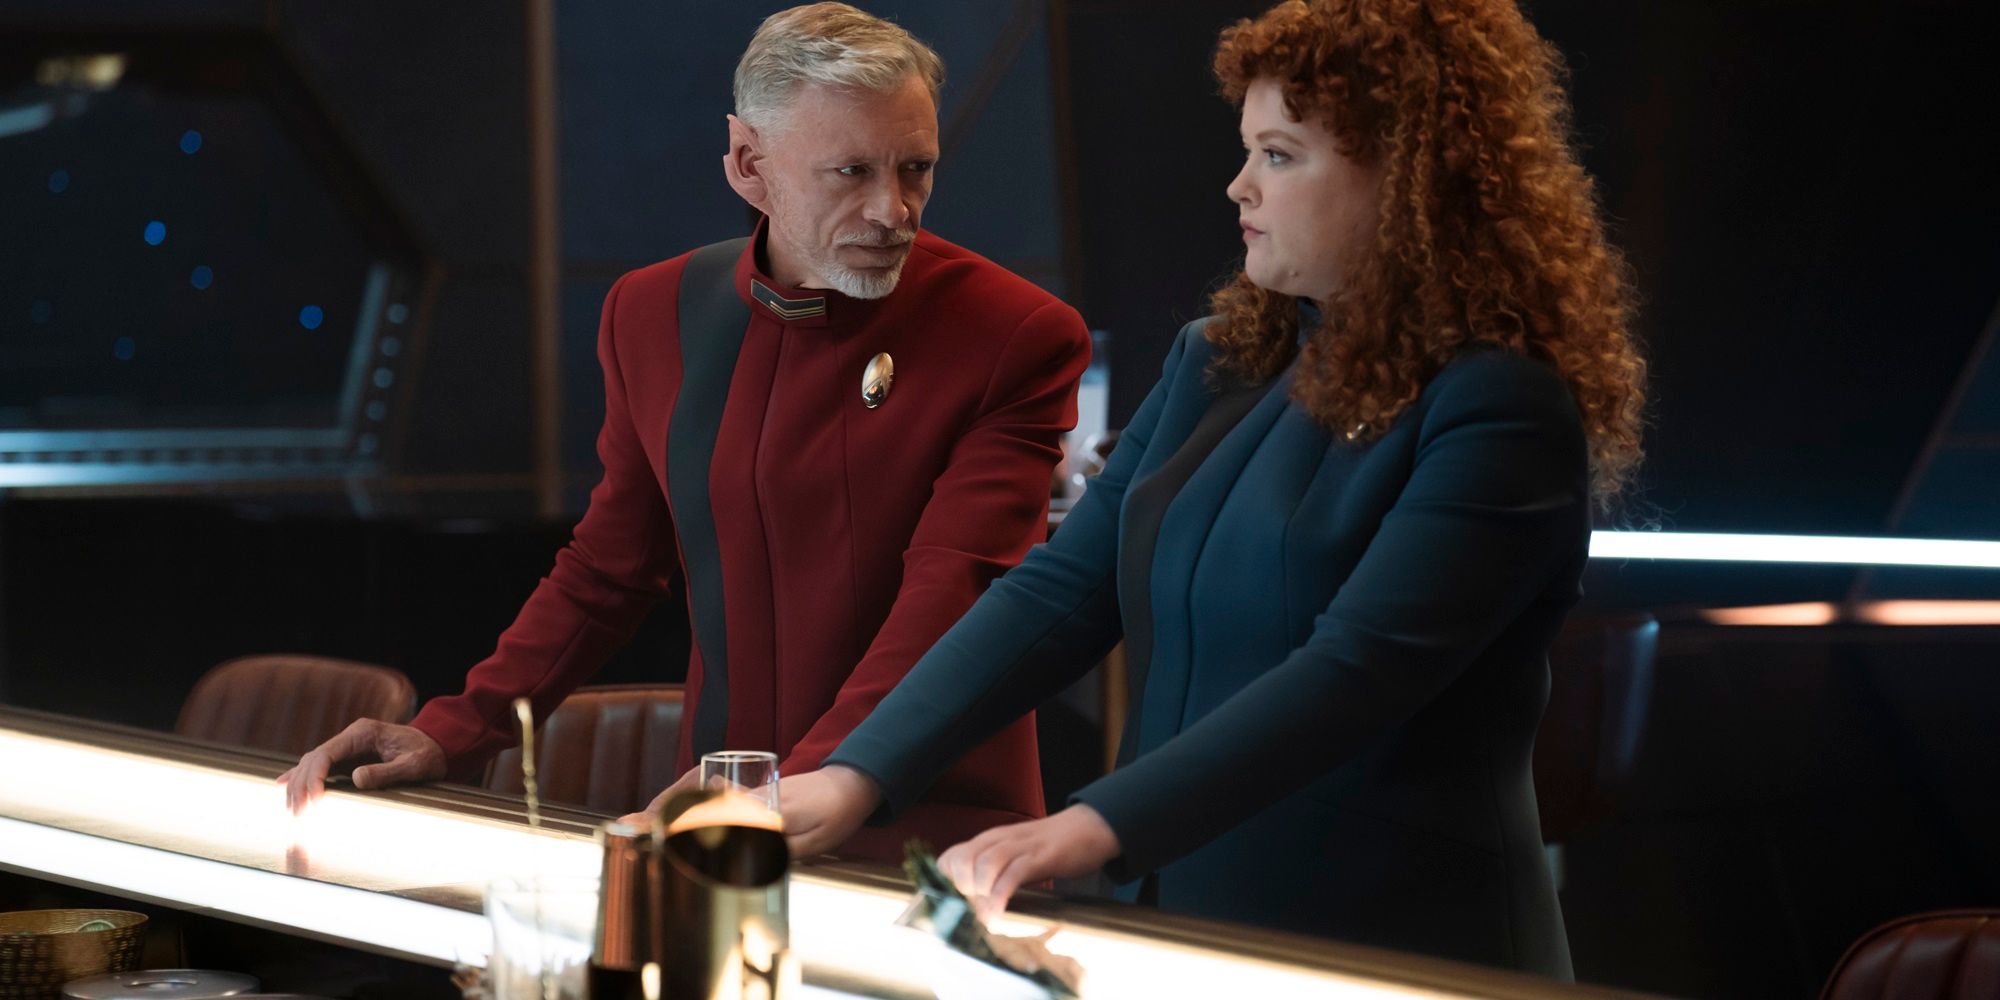 Rayner and Tilly have a drink at the ship bar in Star Trek: Discovery